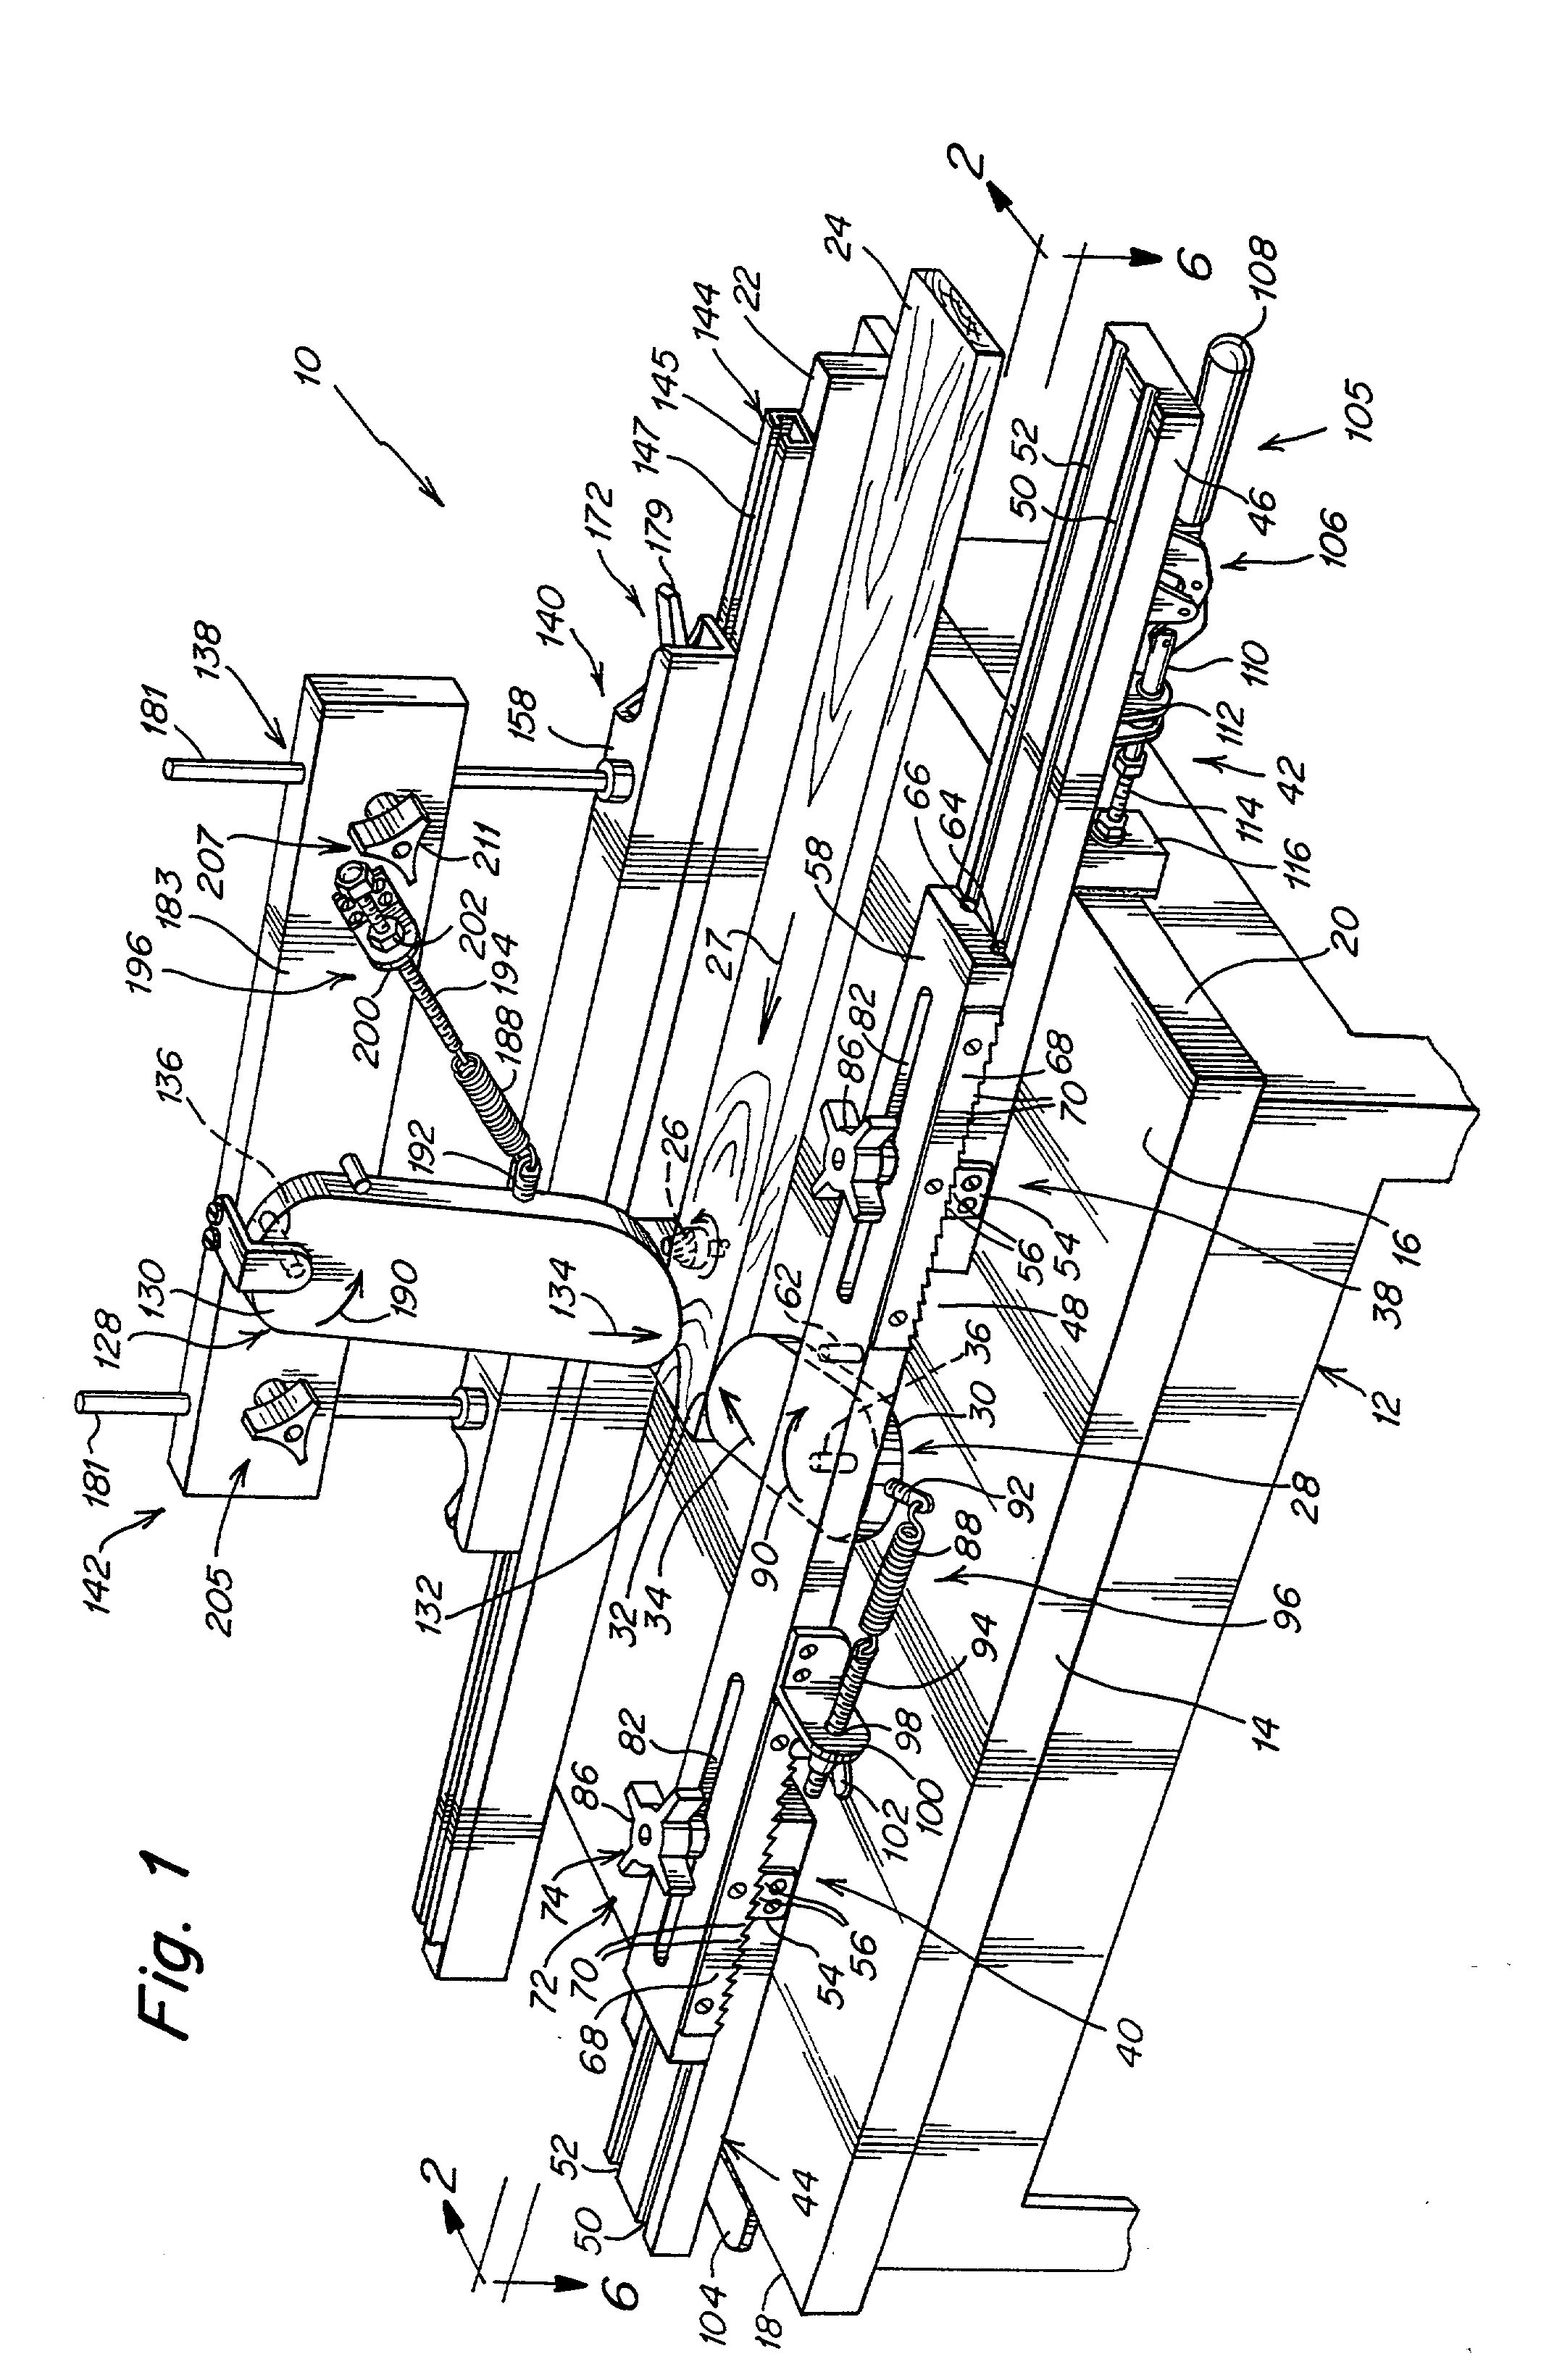 Combination workpiece positioning/hold-down and anti-kickback device for a work table